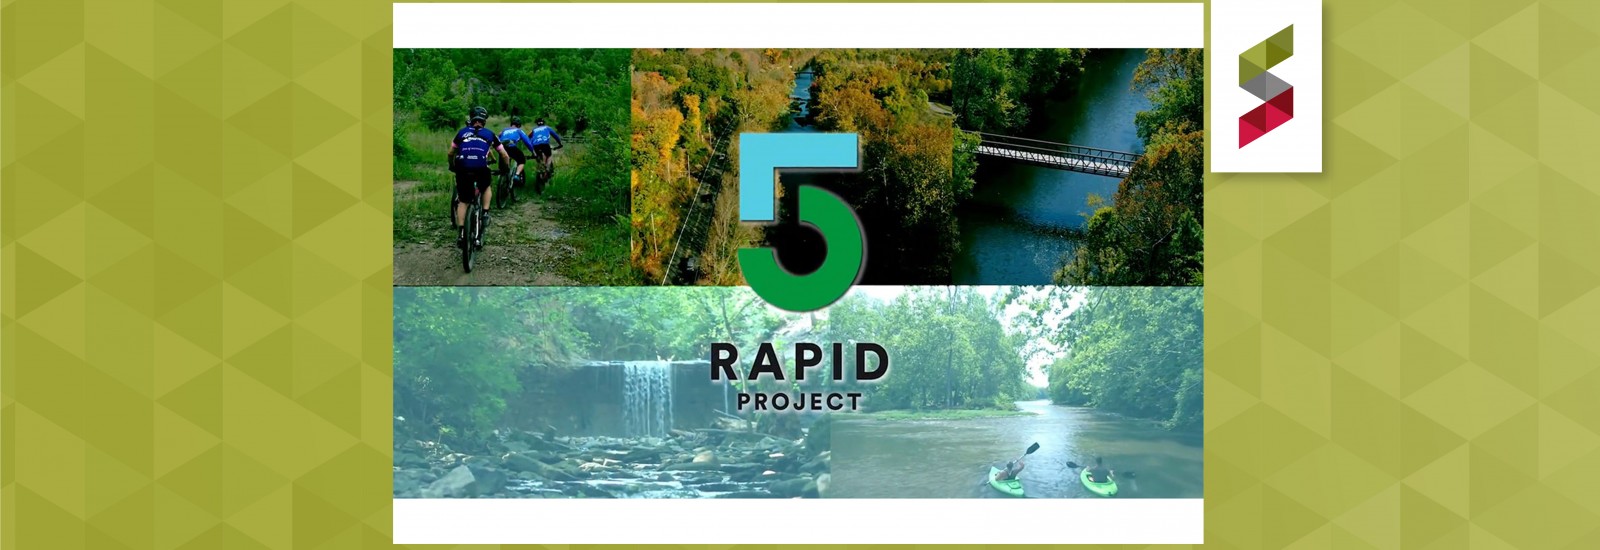 green banner with image of bicyclists, water ways, kayakers and "Rapid 5"